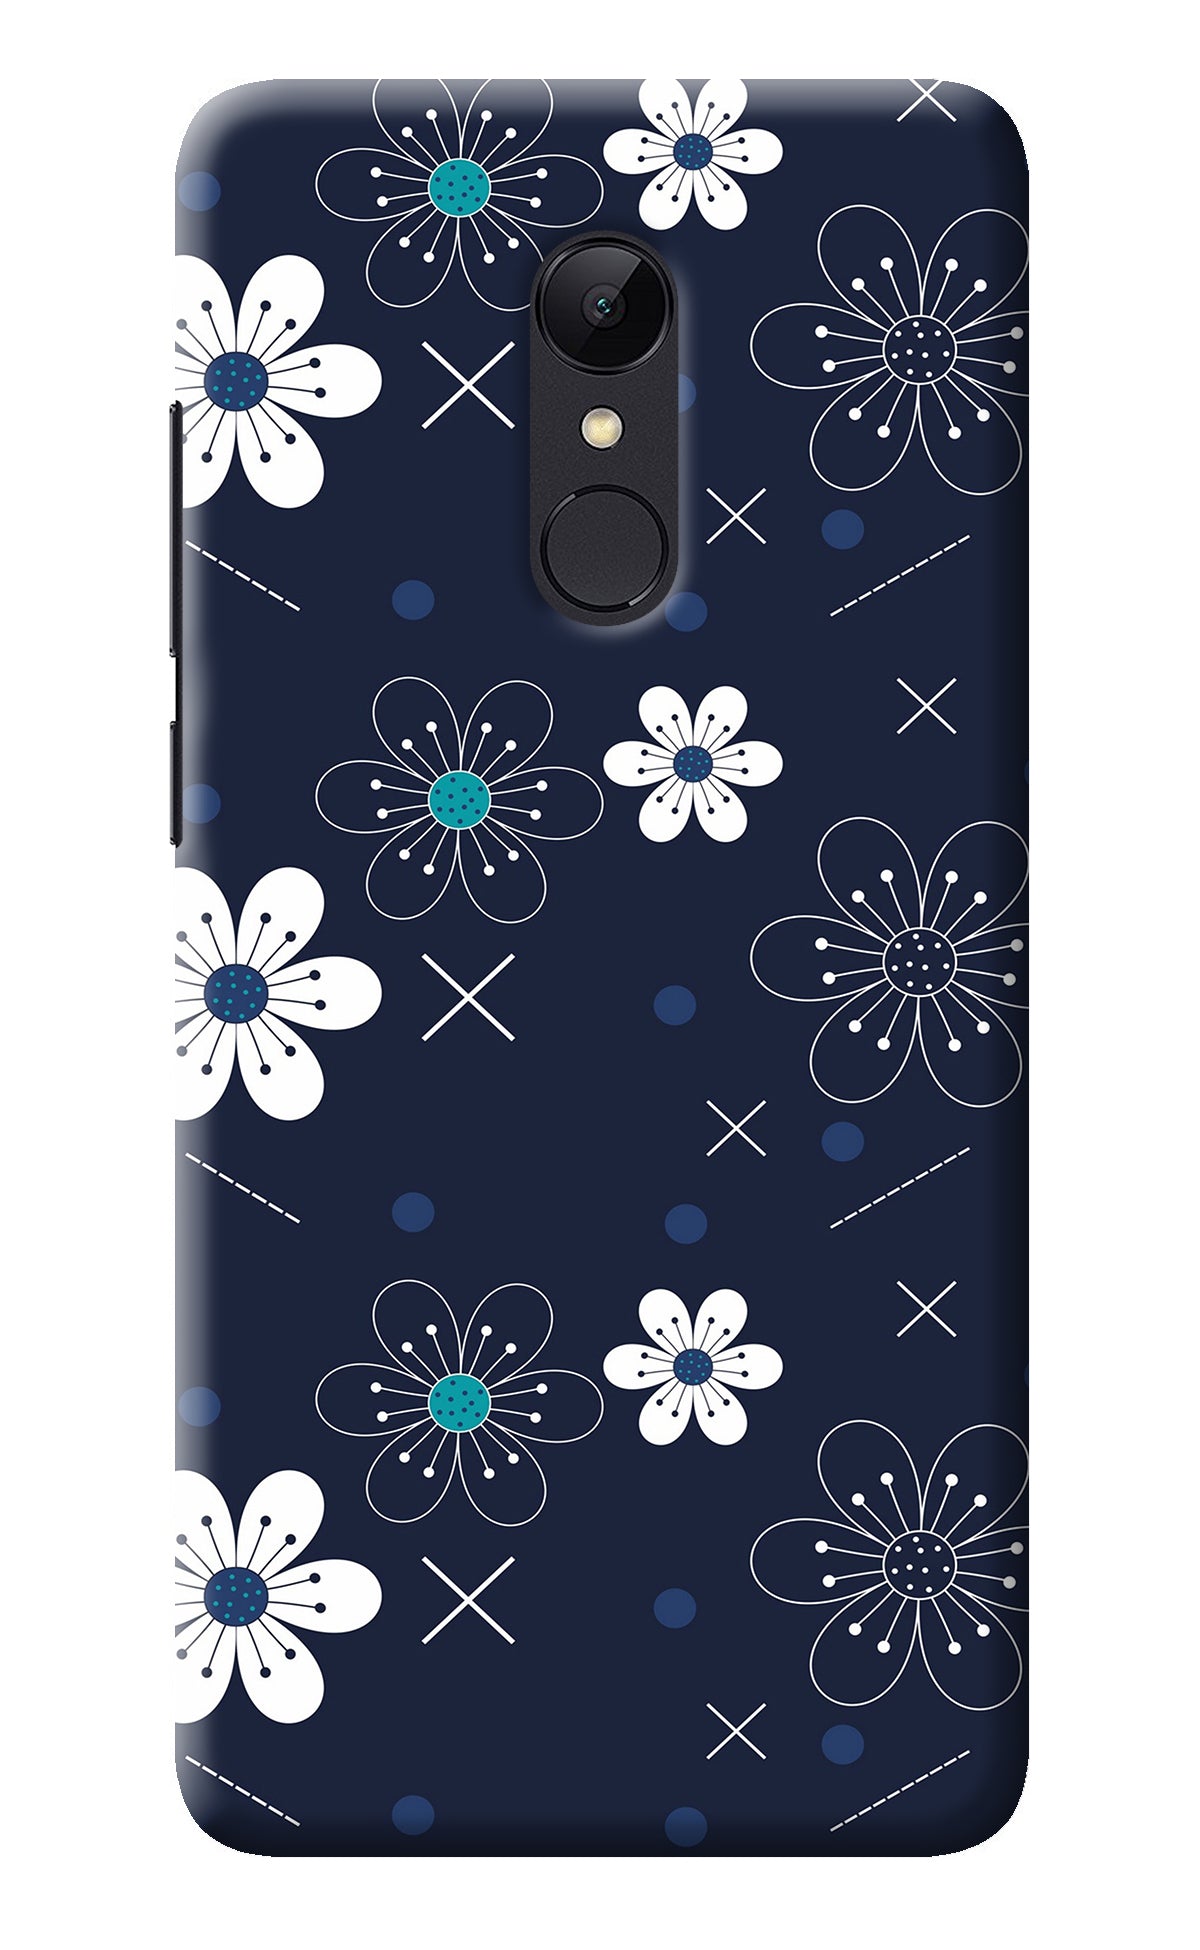 Flowers Redmi Note 5 Back Cover